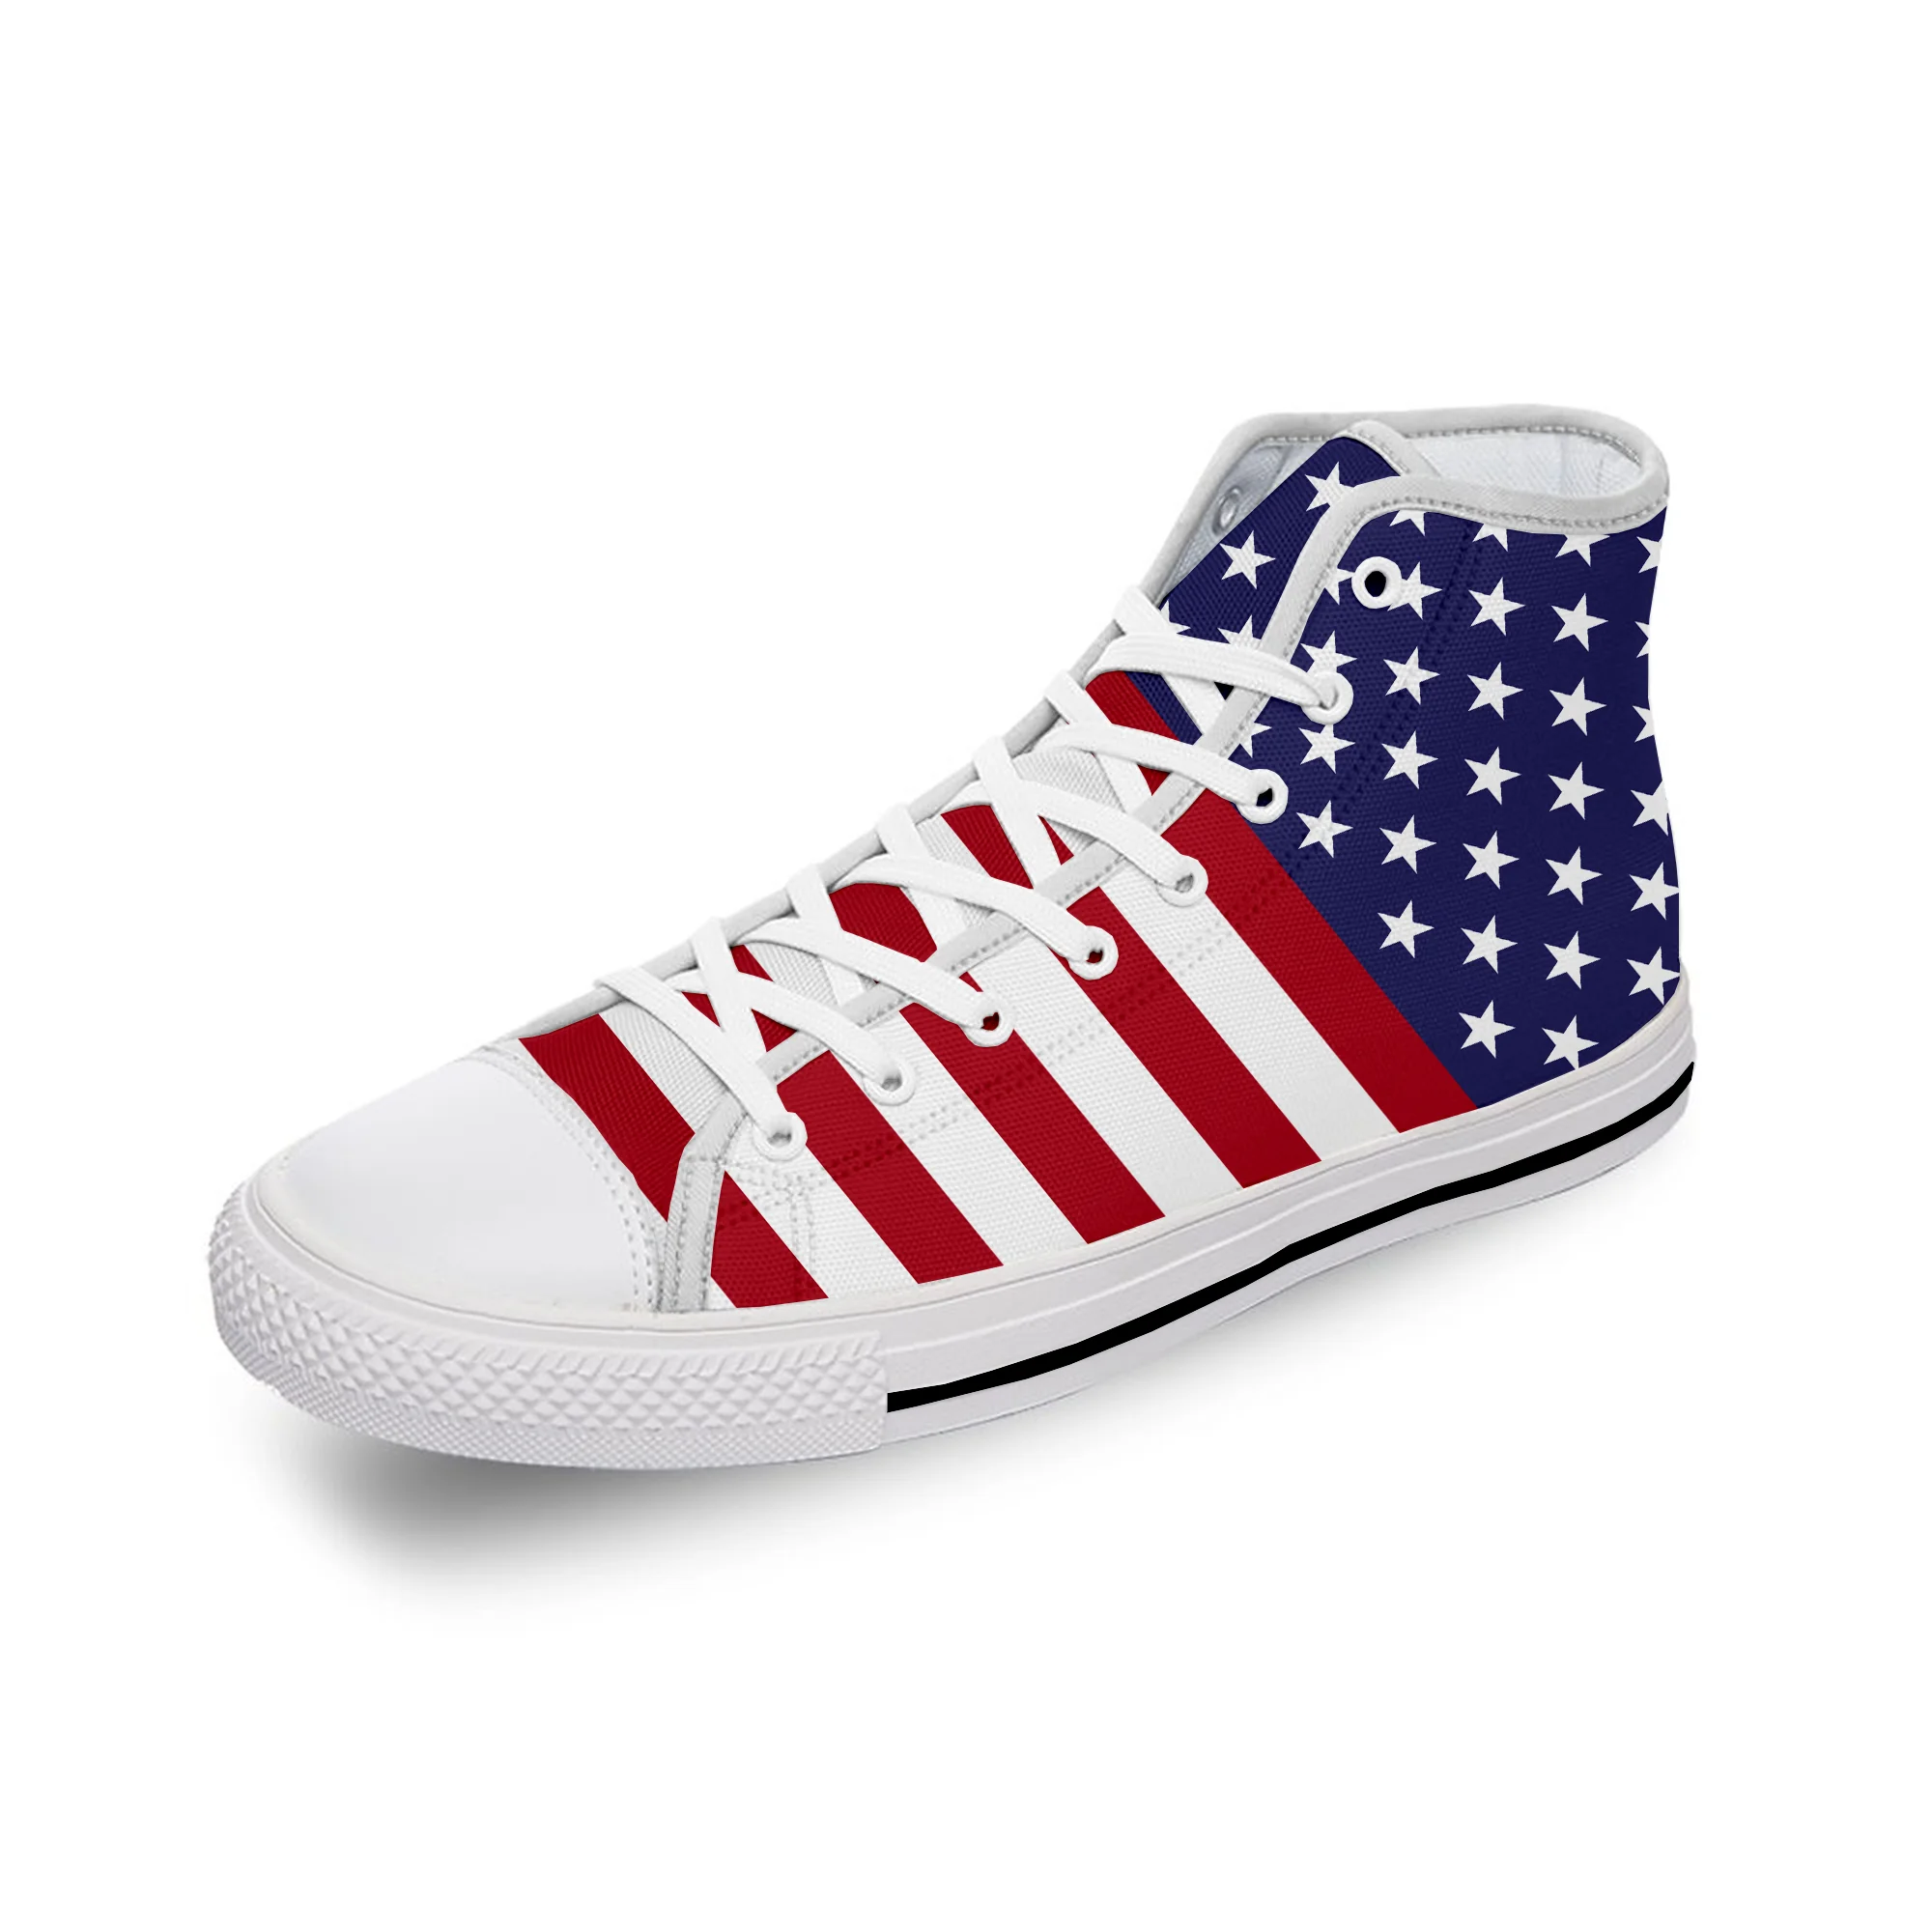 цена USA FLAG I LOVE AMERICA Patriot Casual Cloth Shoes High Top Lightweight Breathable Print Men Women Sneakers Sports shoe